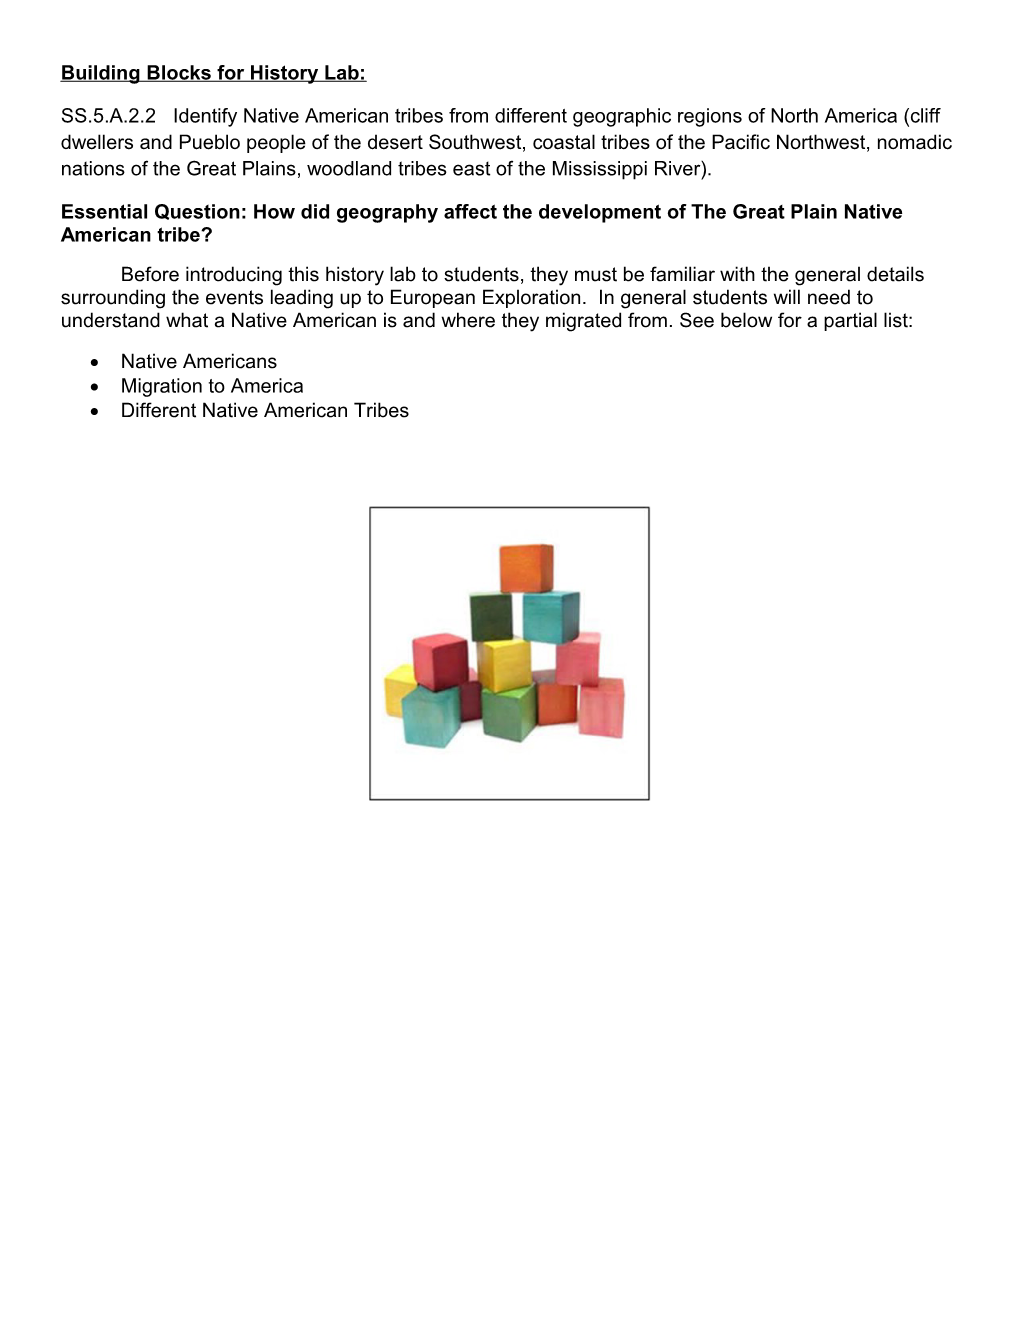 Building Blocks for History Lab s1